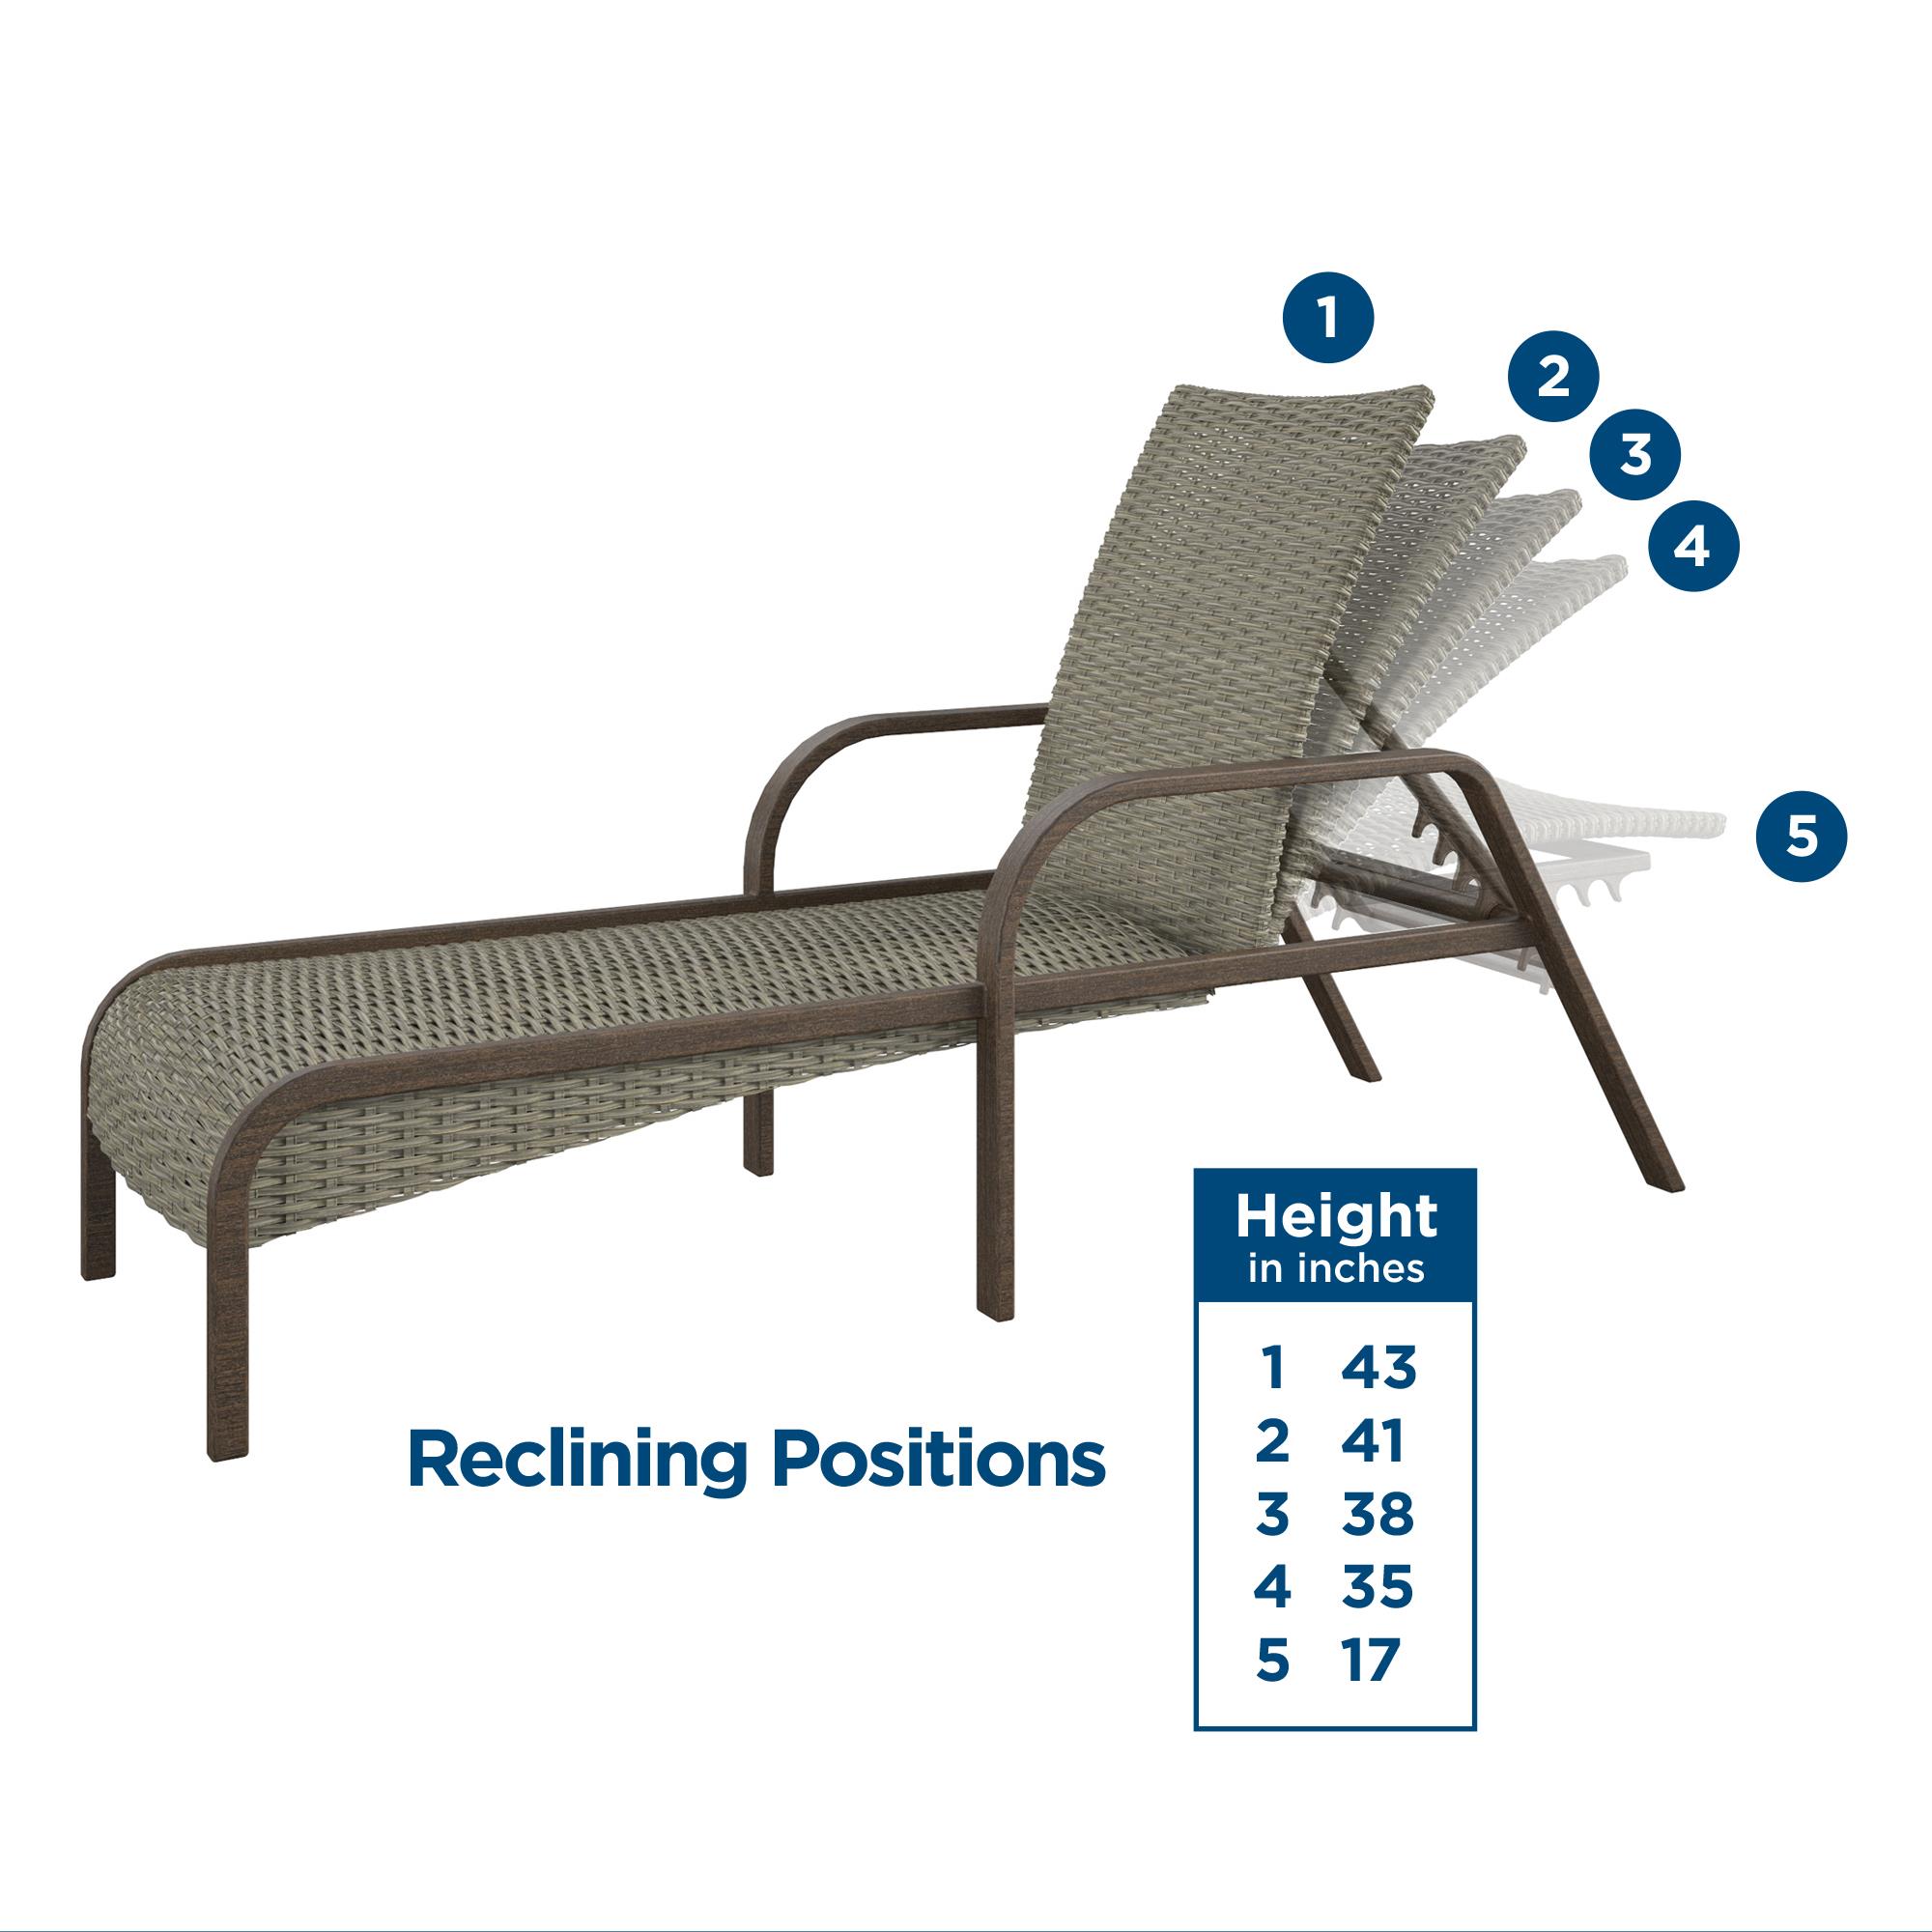 COSCO Outdoor Living, SmartWick, Patio Chaise Lounge, Warm Gray - image 4 of 9